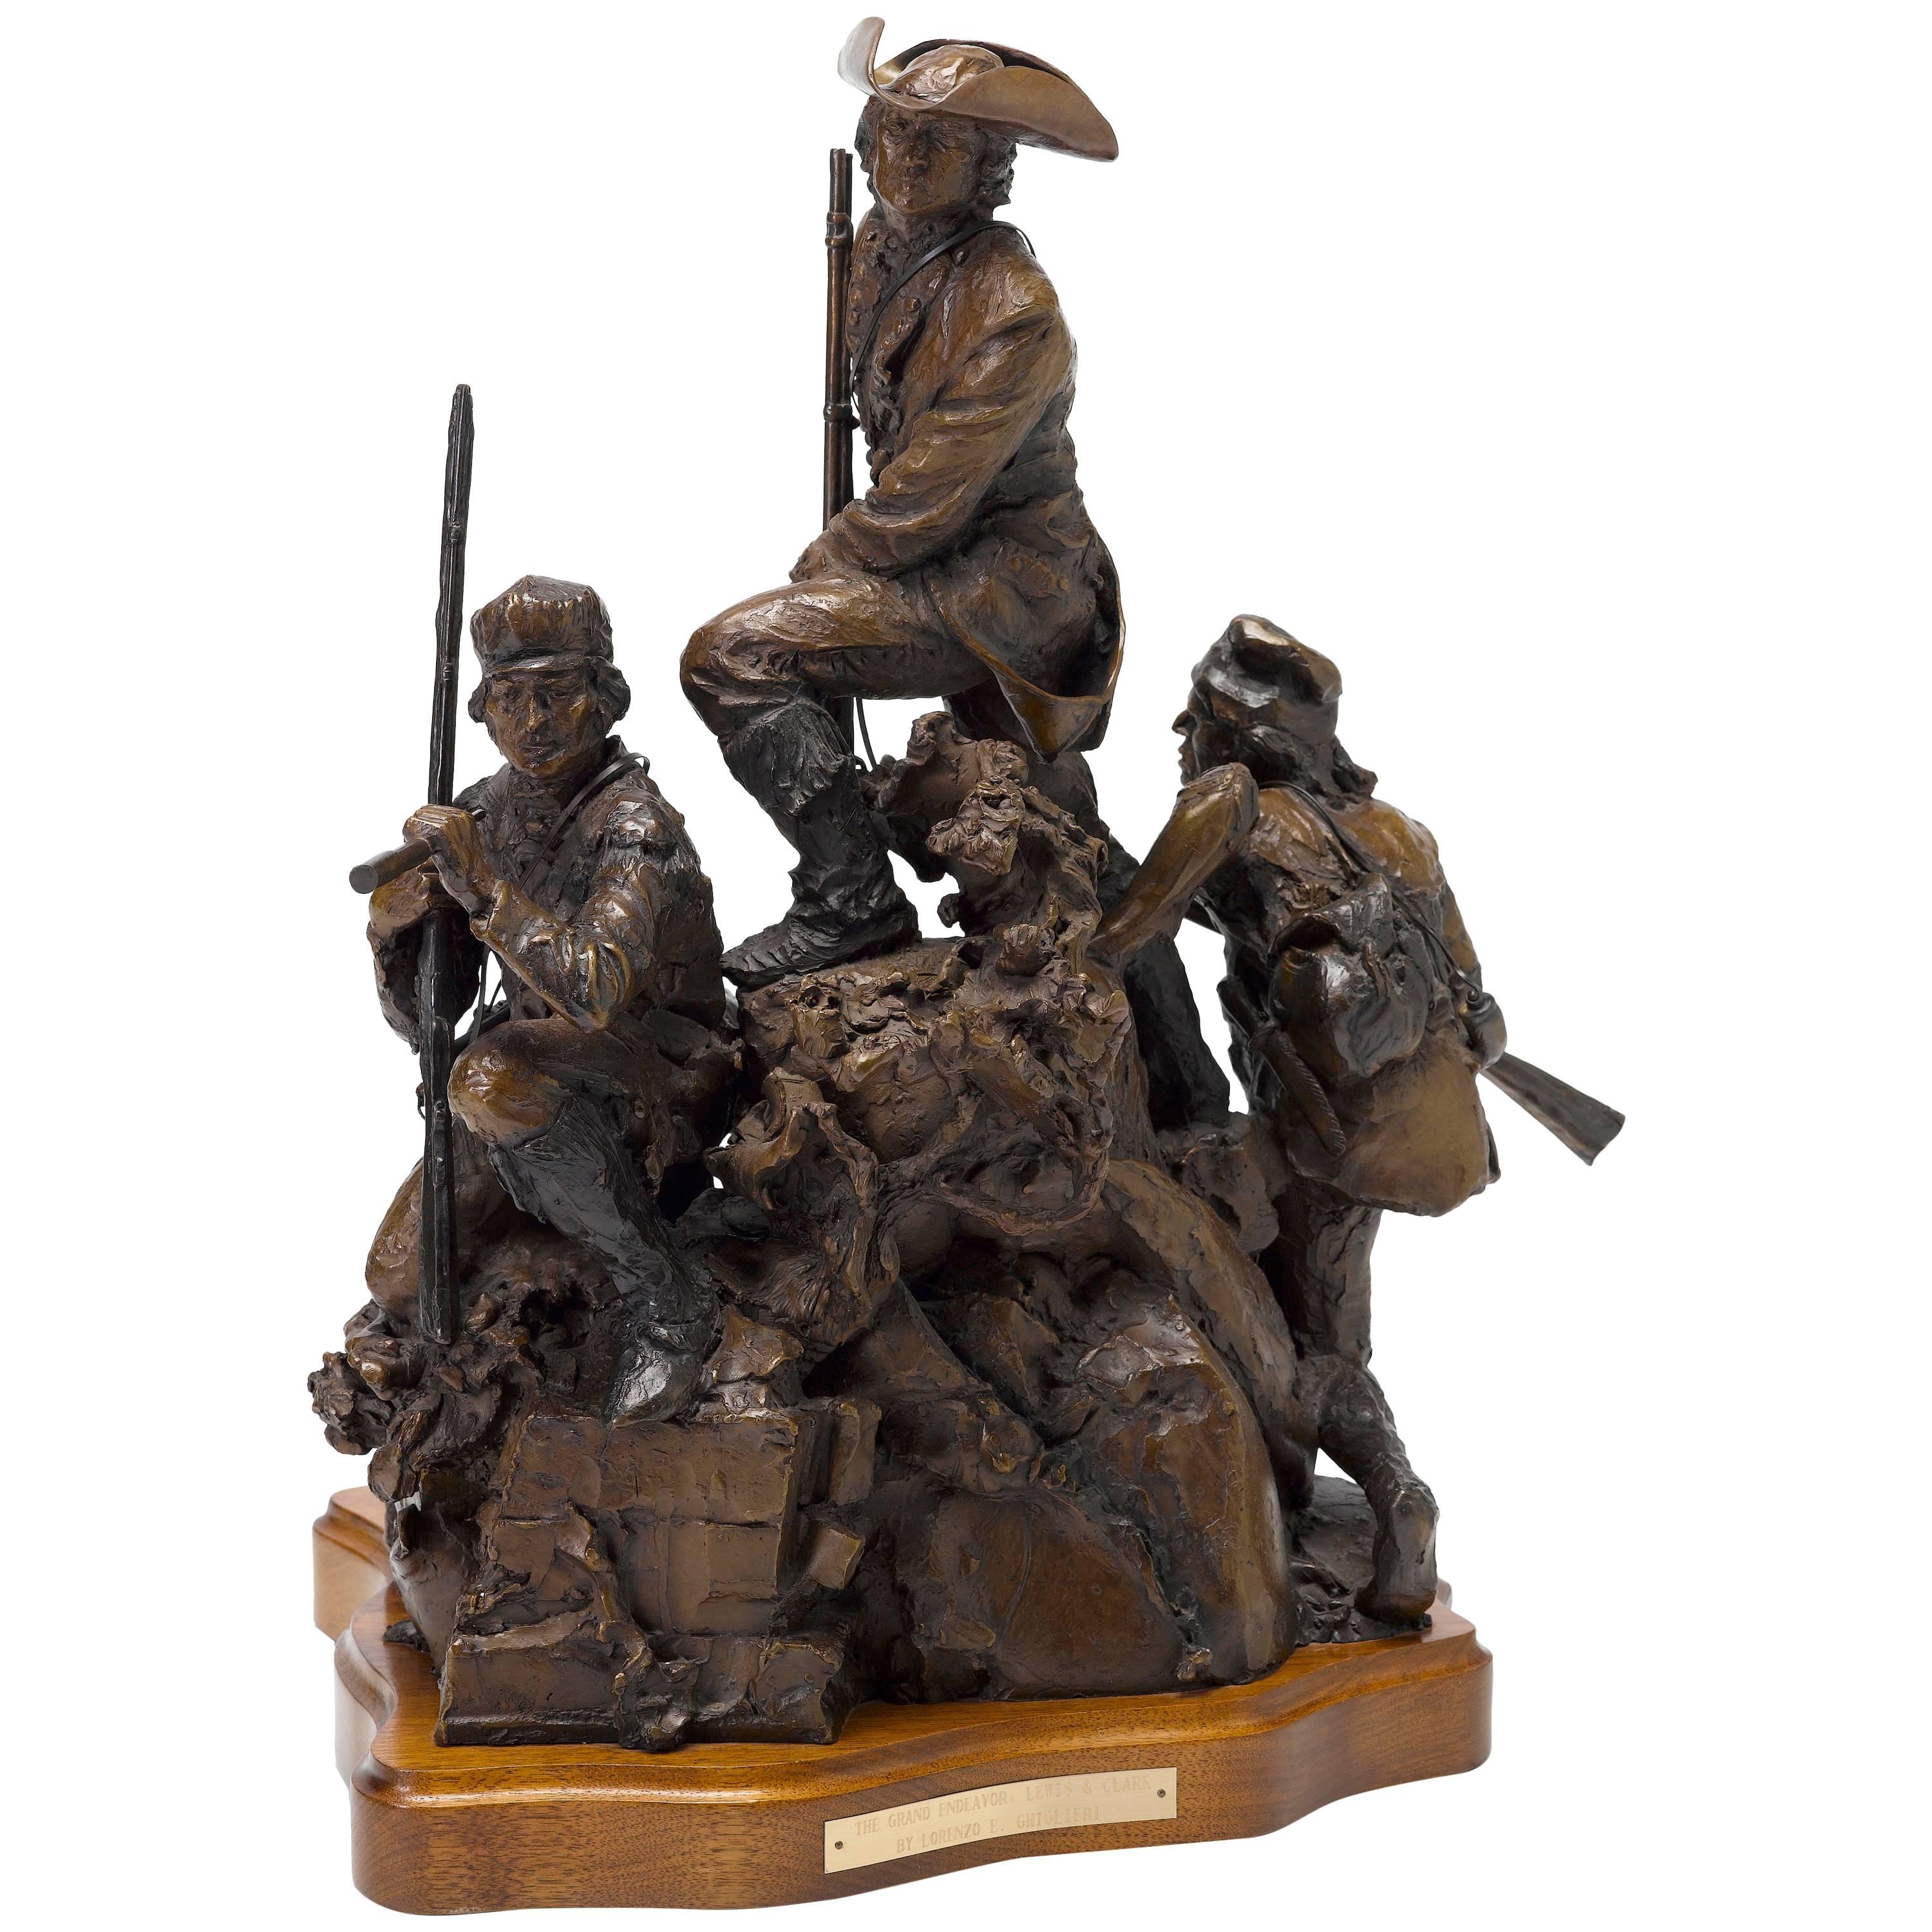 "The Grand Endeavor: Lewis & Clark", Limited Edition Bronze, No. 9 of 33